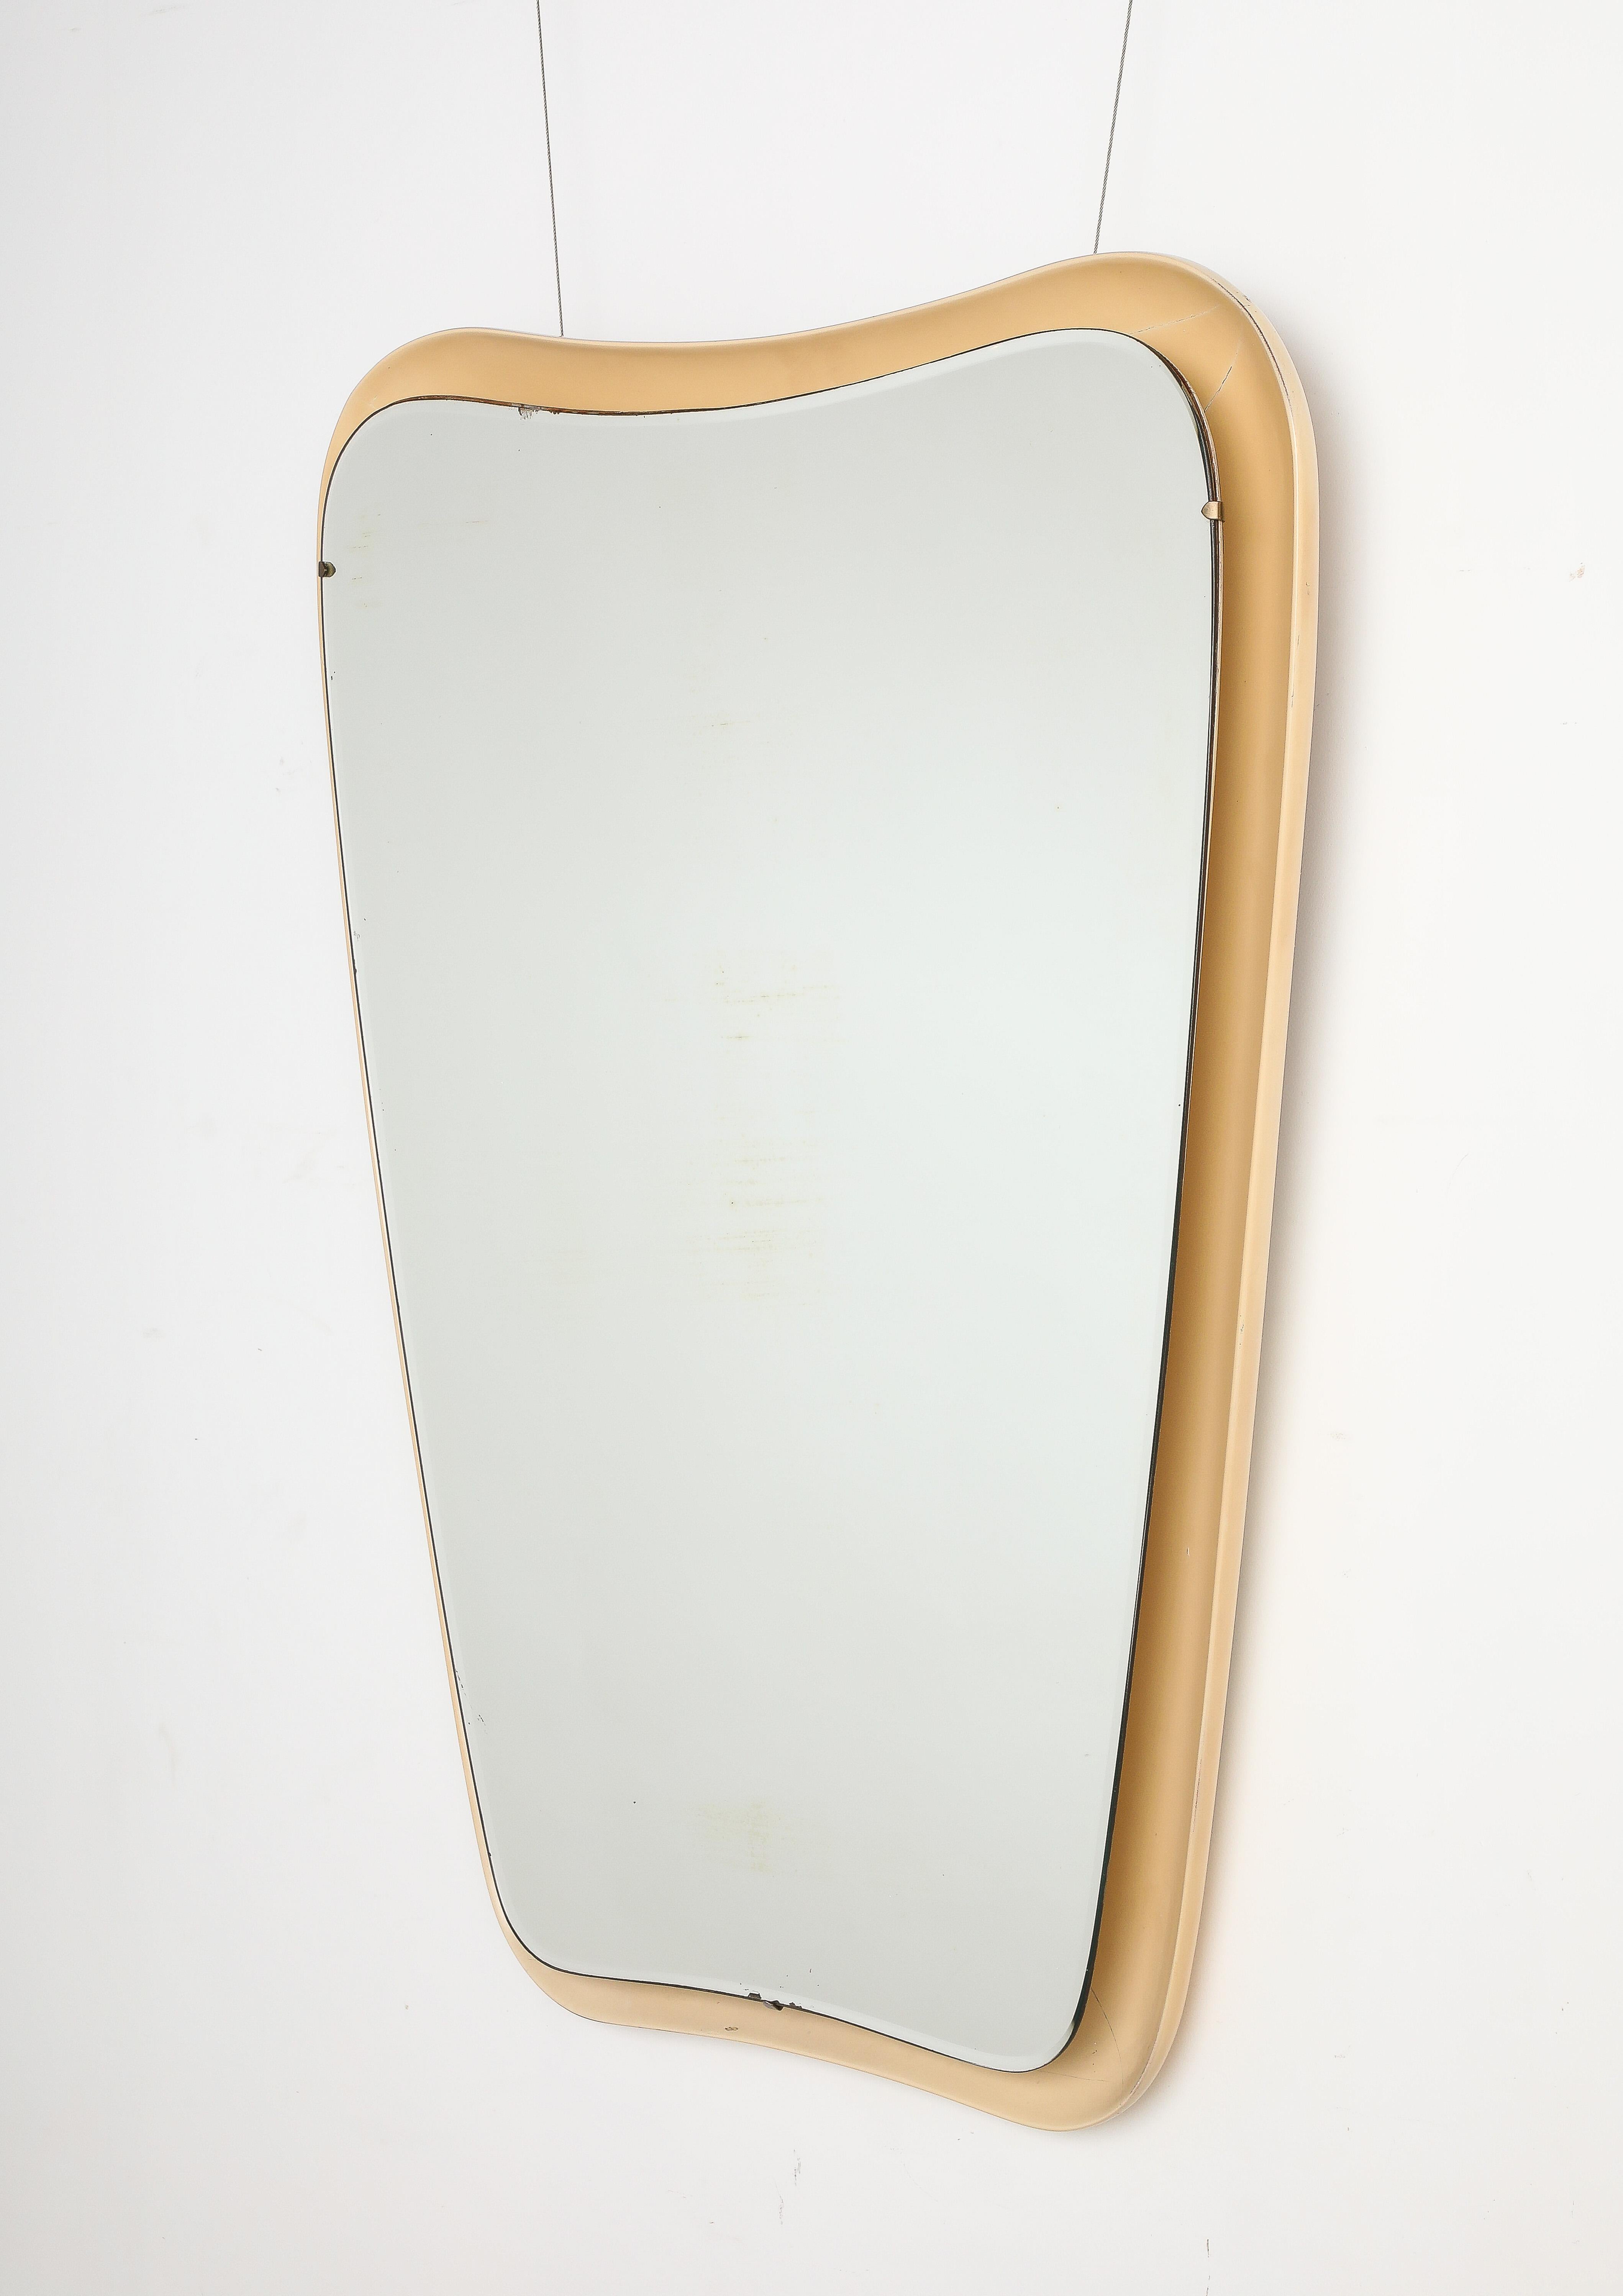 Glass Italian Modernist Lacquered Floating Wall Mirror, Italy, circa 1960  For Sale